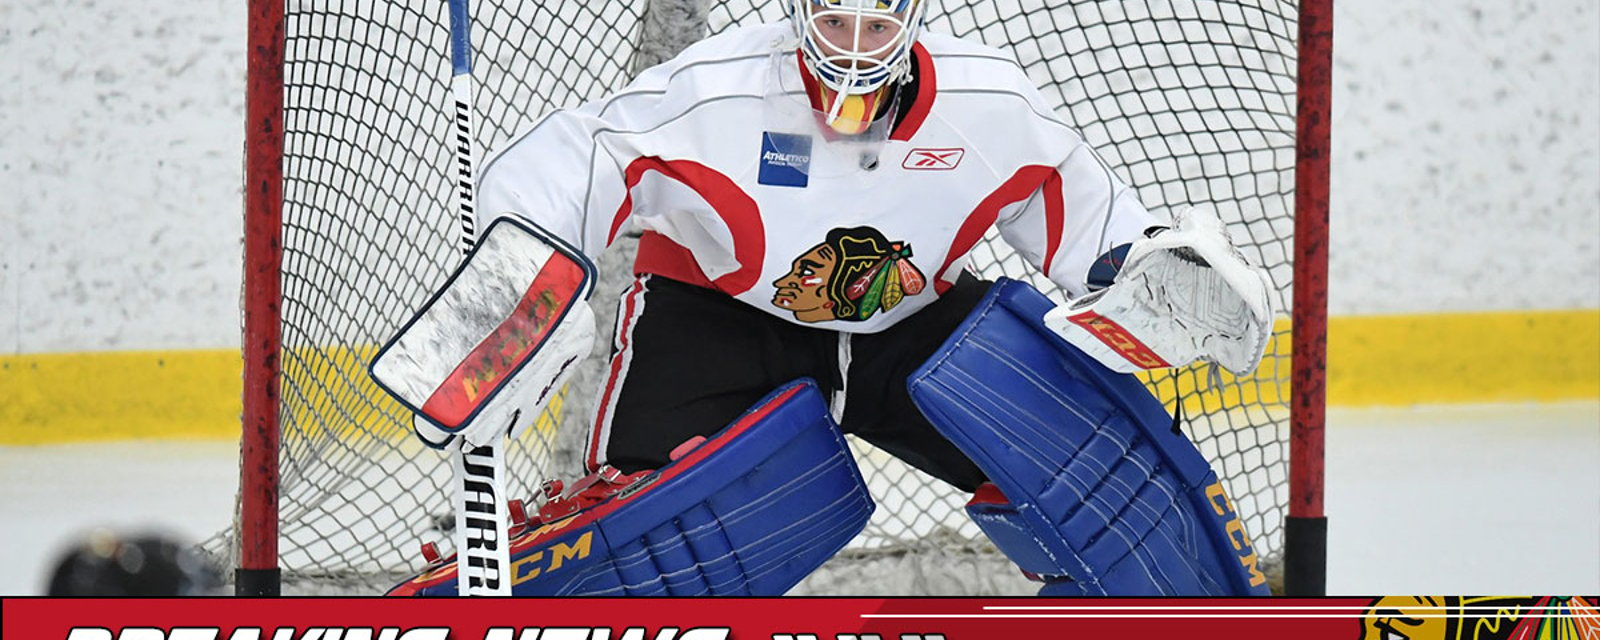 Breaking: Blackhawks goalie rips up KHL contract, headed for North America